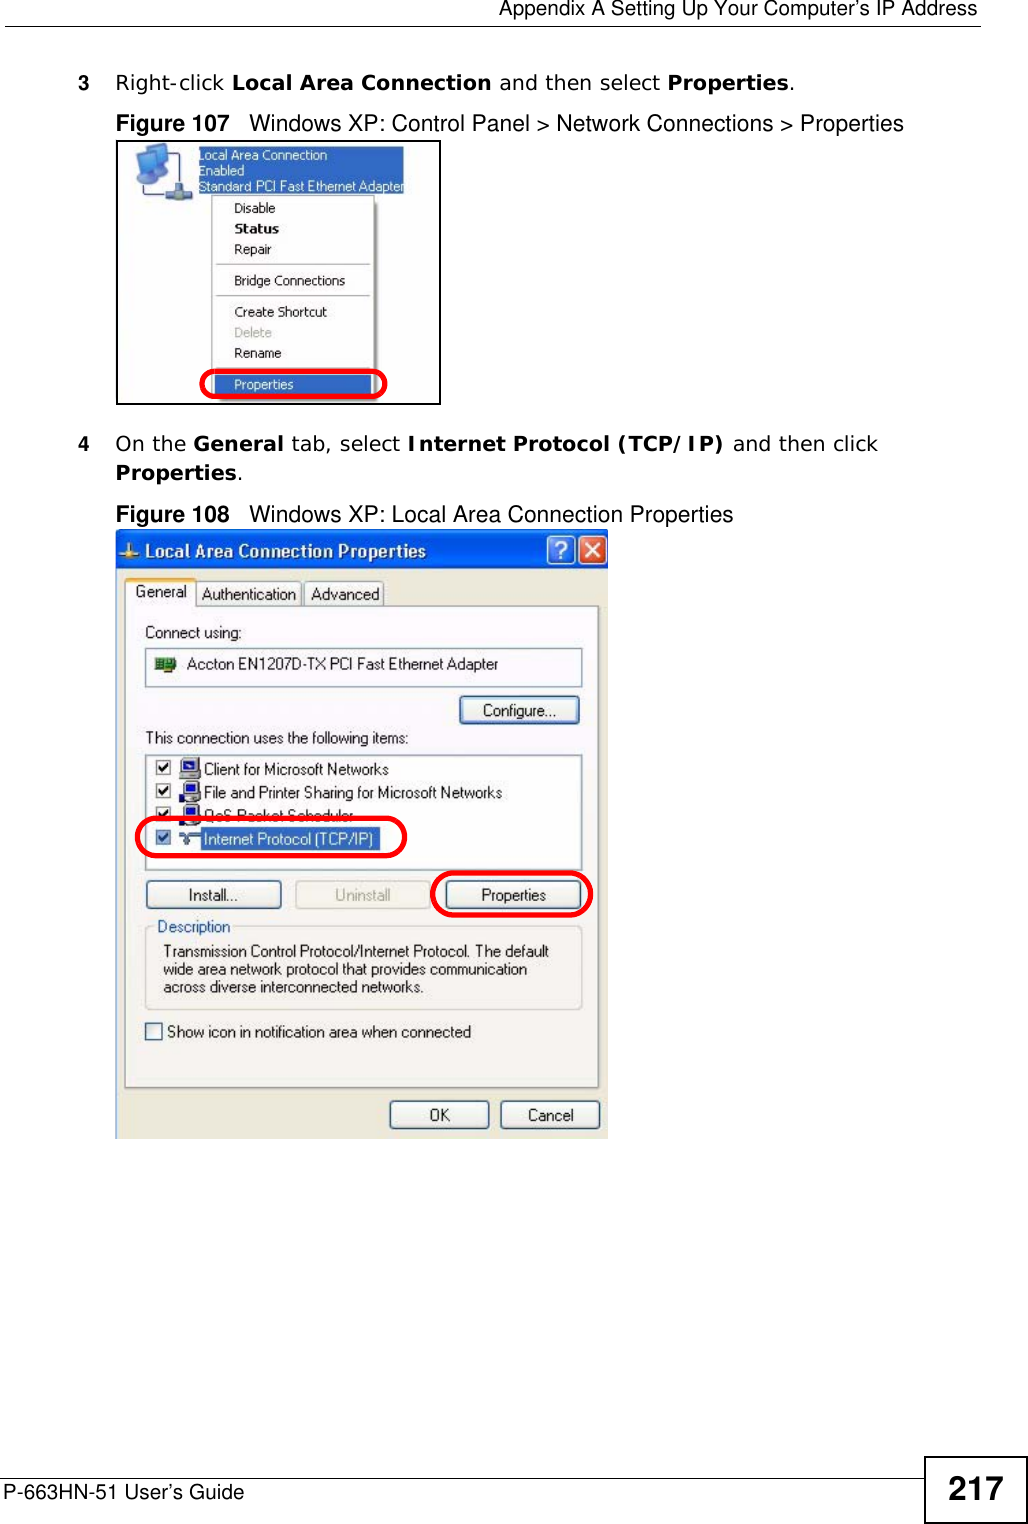  Appendix A Setting Up Your Computer’s IP AddressP-663HN-51 User’s Guide 2173Right-click Local Area Connection and then select Properties.Figure 107   Windows XP: Control Panel &gt; Network Connections &gt; Properties4On the General tab, select Internet Protocol (TCP/IP) and then click Properties.Figure 108   Windows XP: Local Area Connection Properties